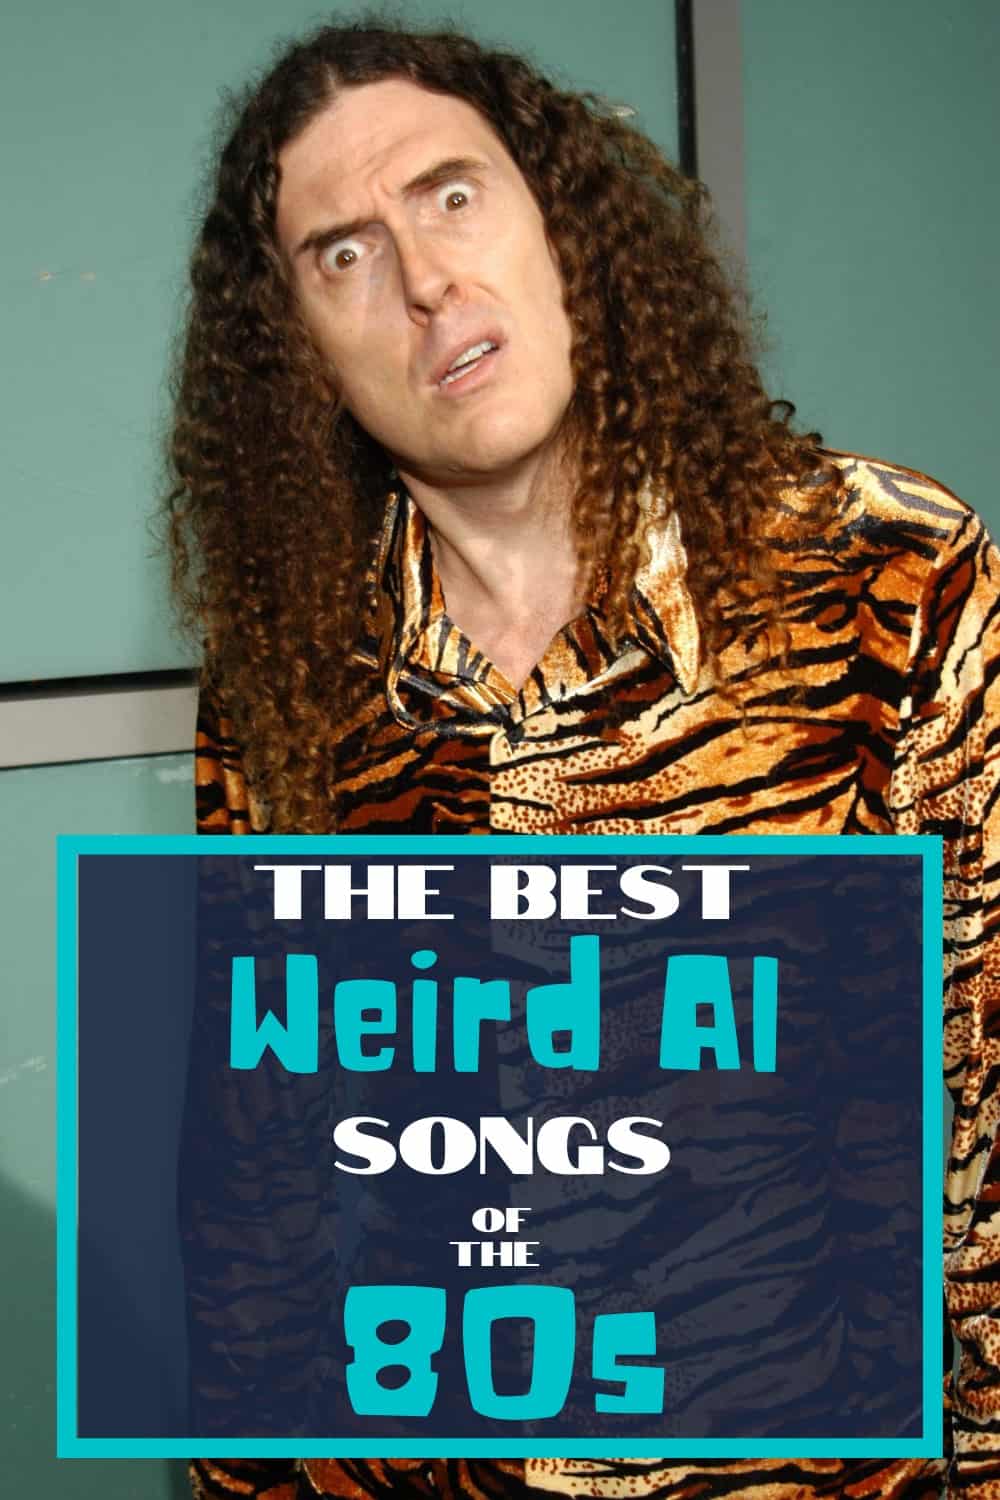 What is the Best Weird Al Song from the 80s